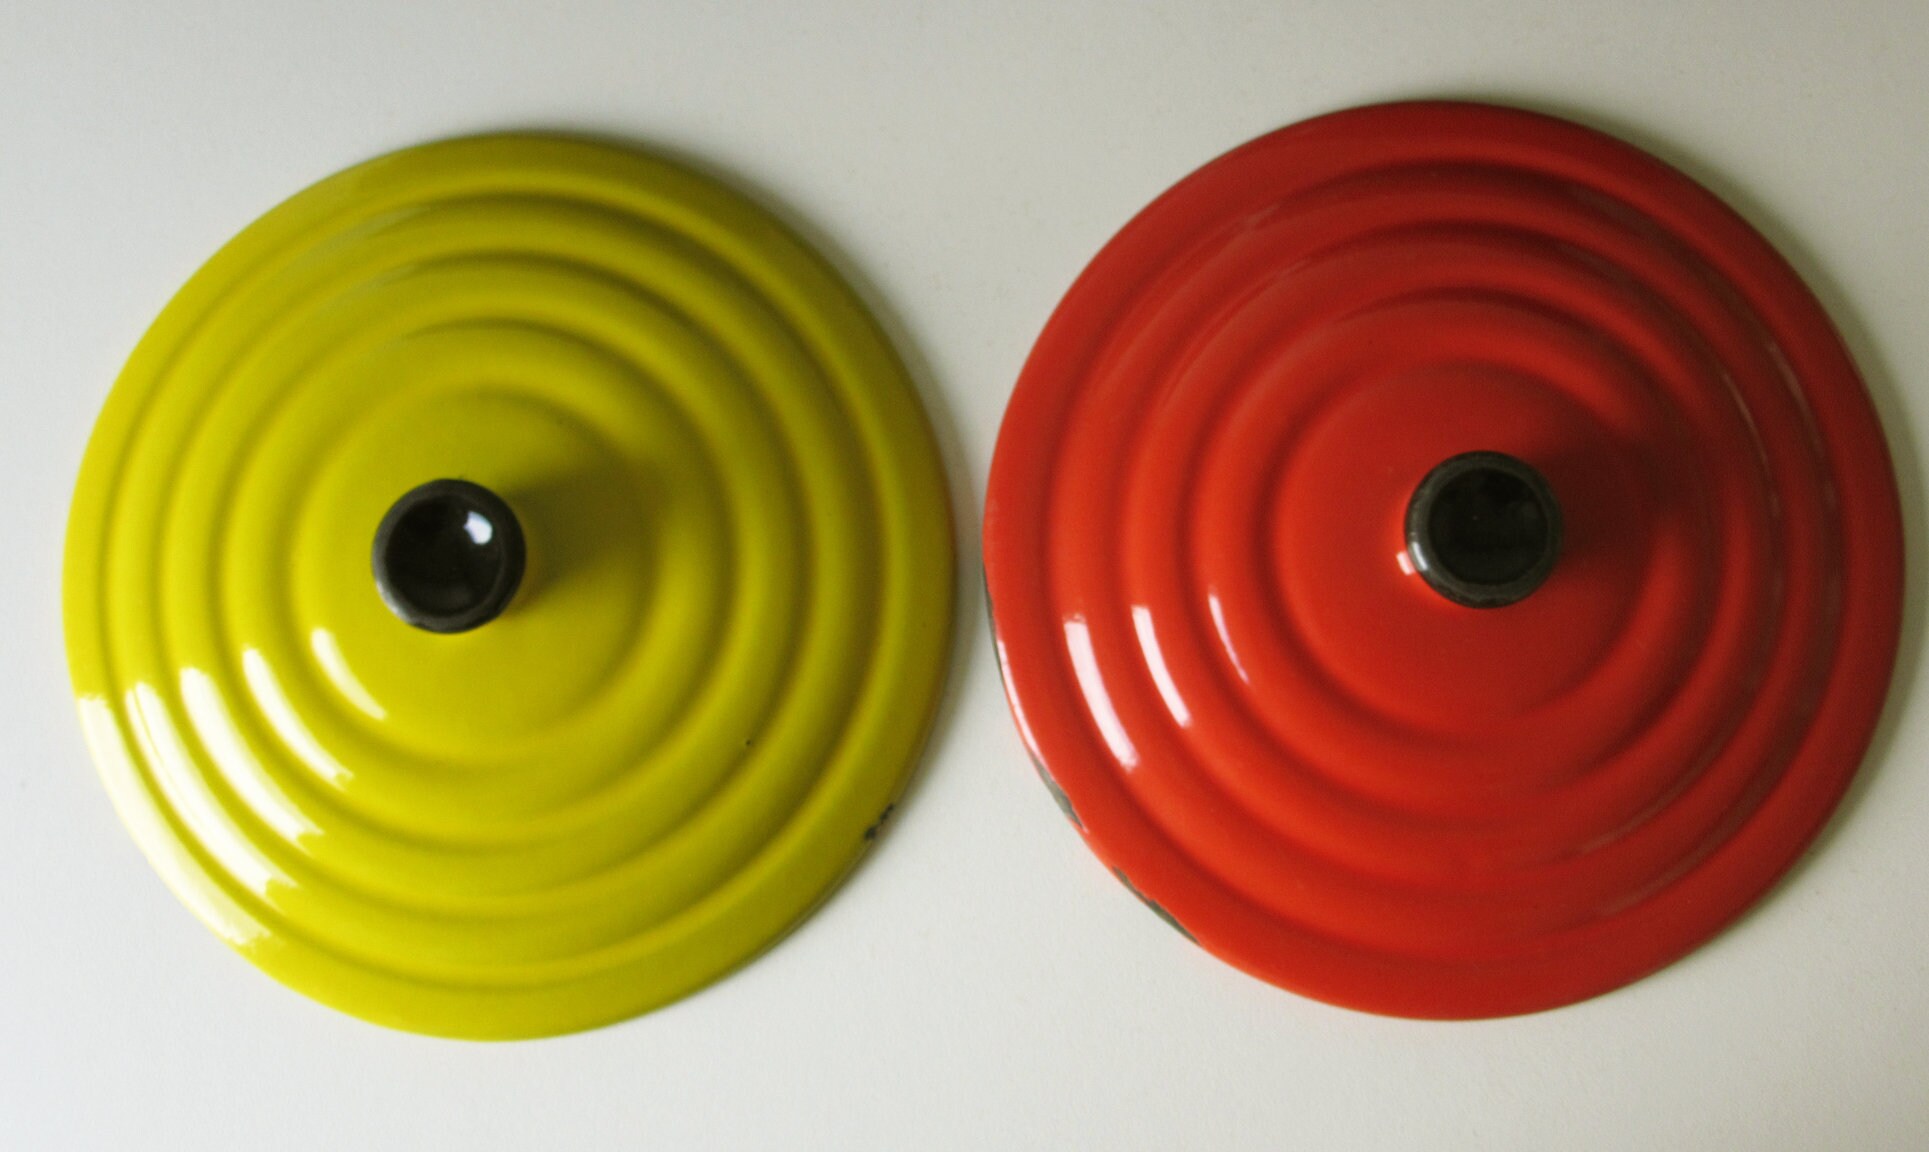 Two Vintage Enamel Fireresistant Dishes Black with Red and Yellow Lid Confetti Design made by DRU Holland 19006